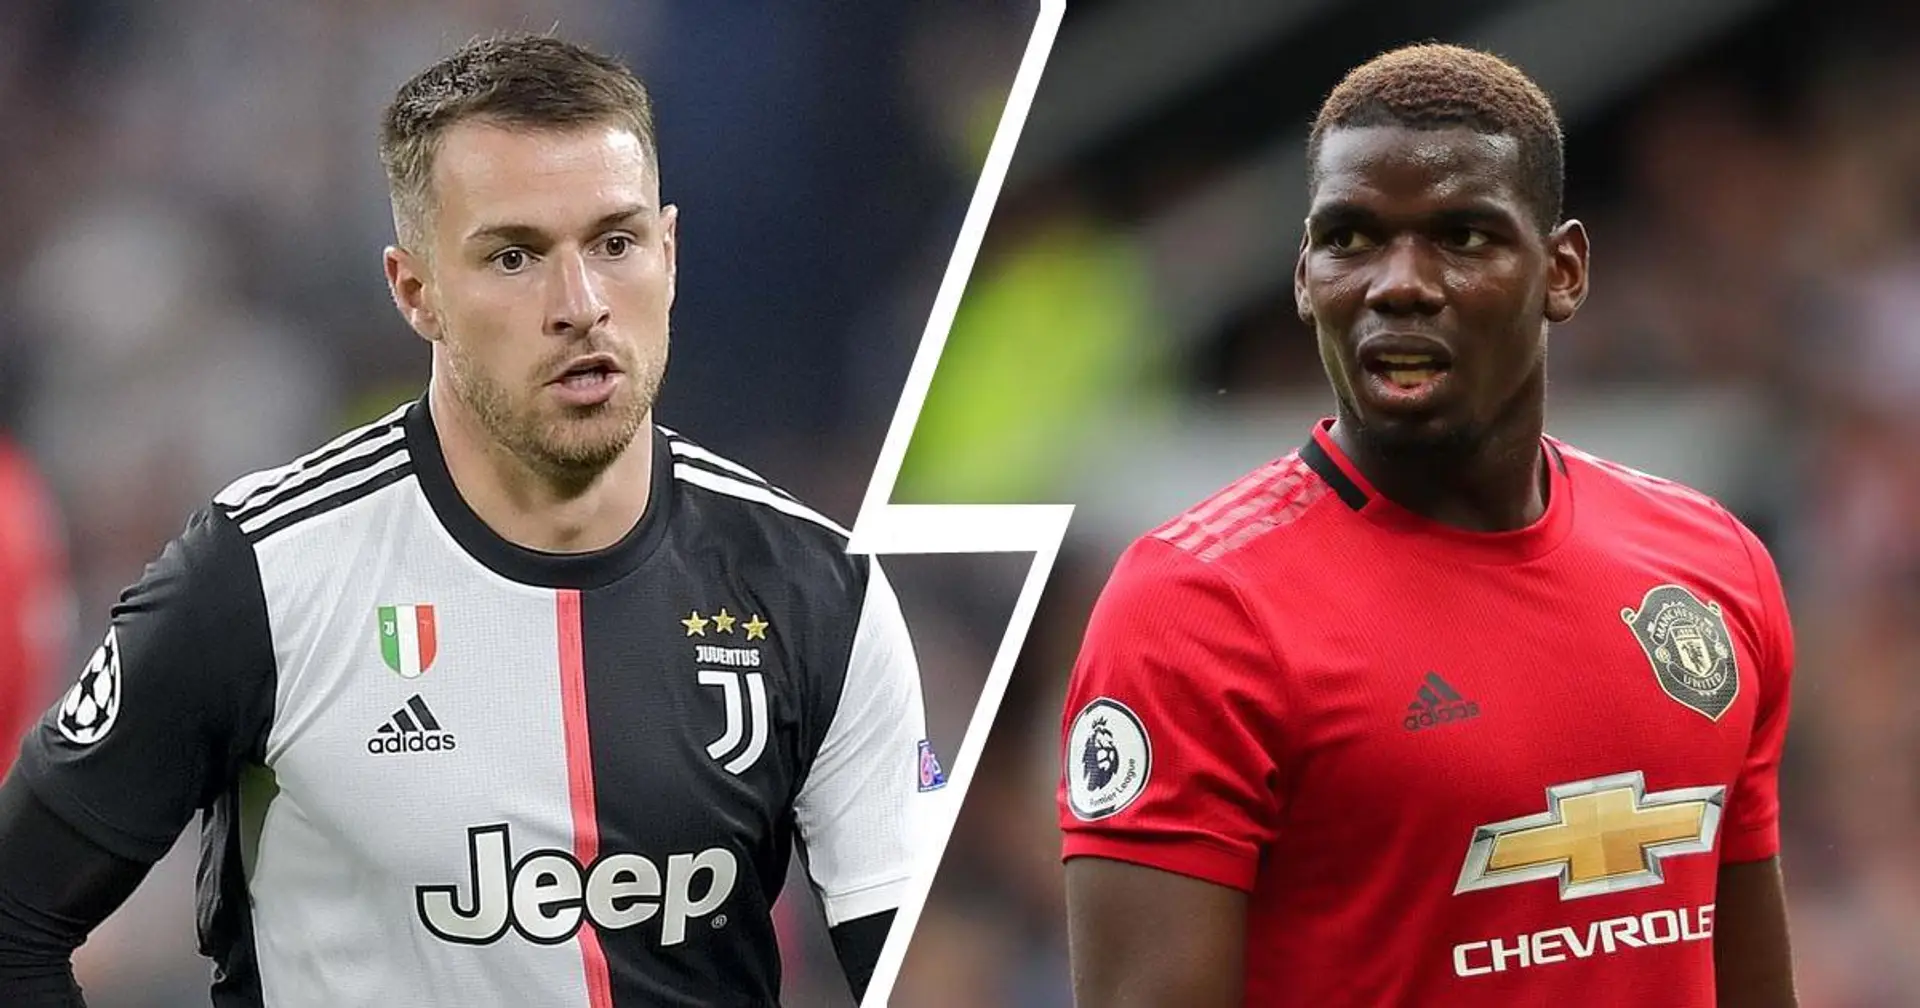 Aaron Ramsey could reportedly move to United as Juventus plan to include Welshman in possible swap deal for Paul Pogba